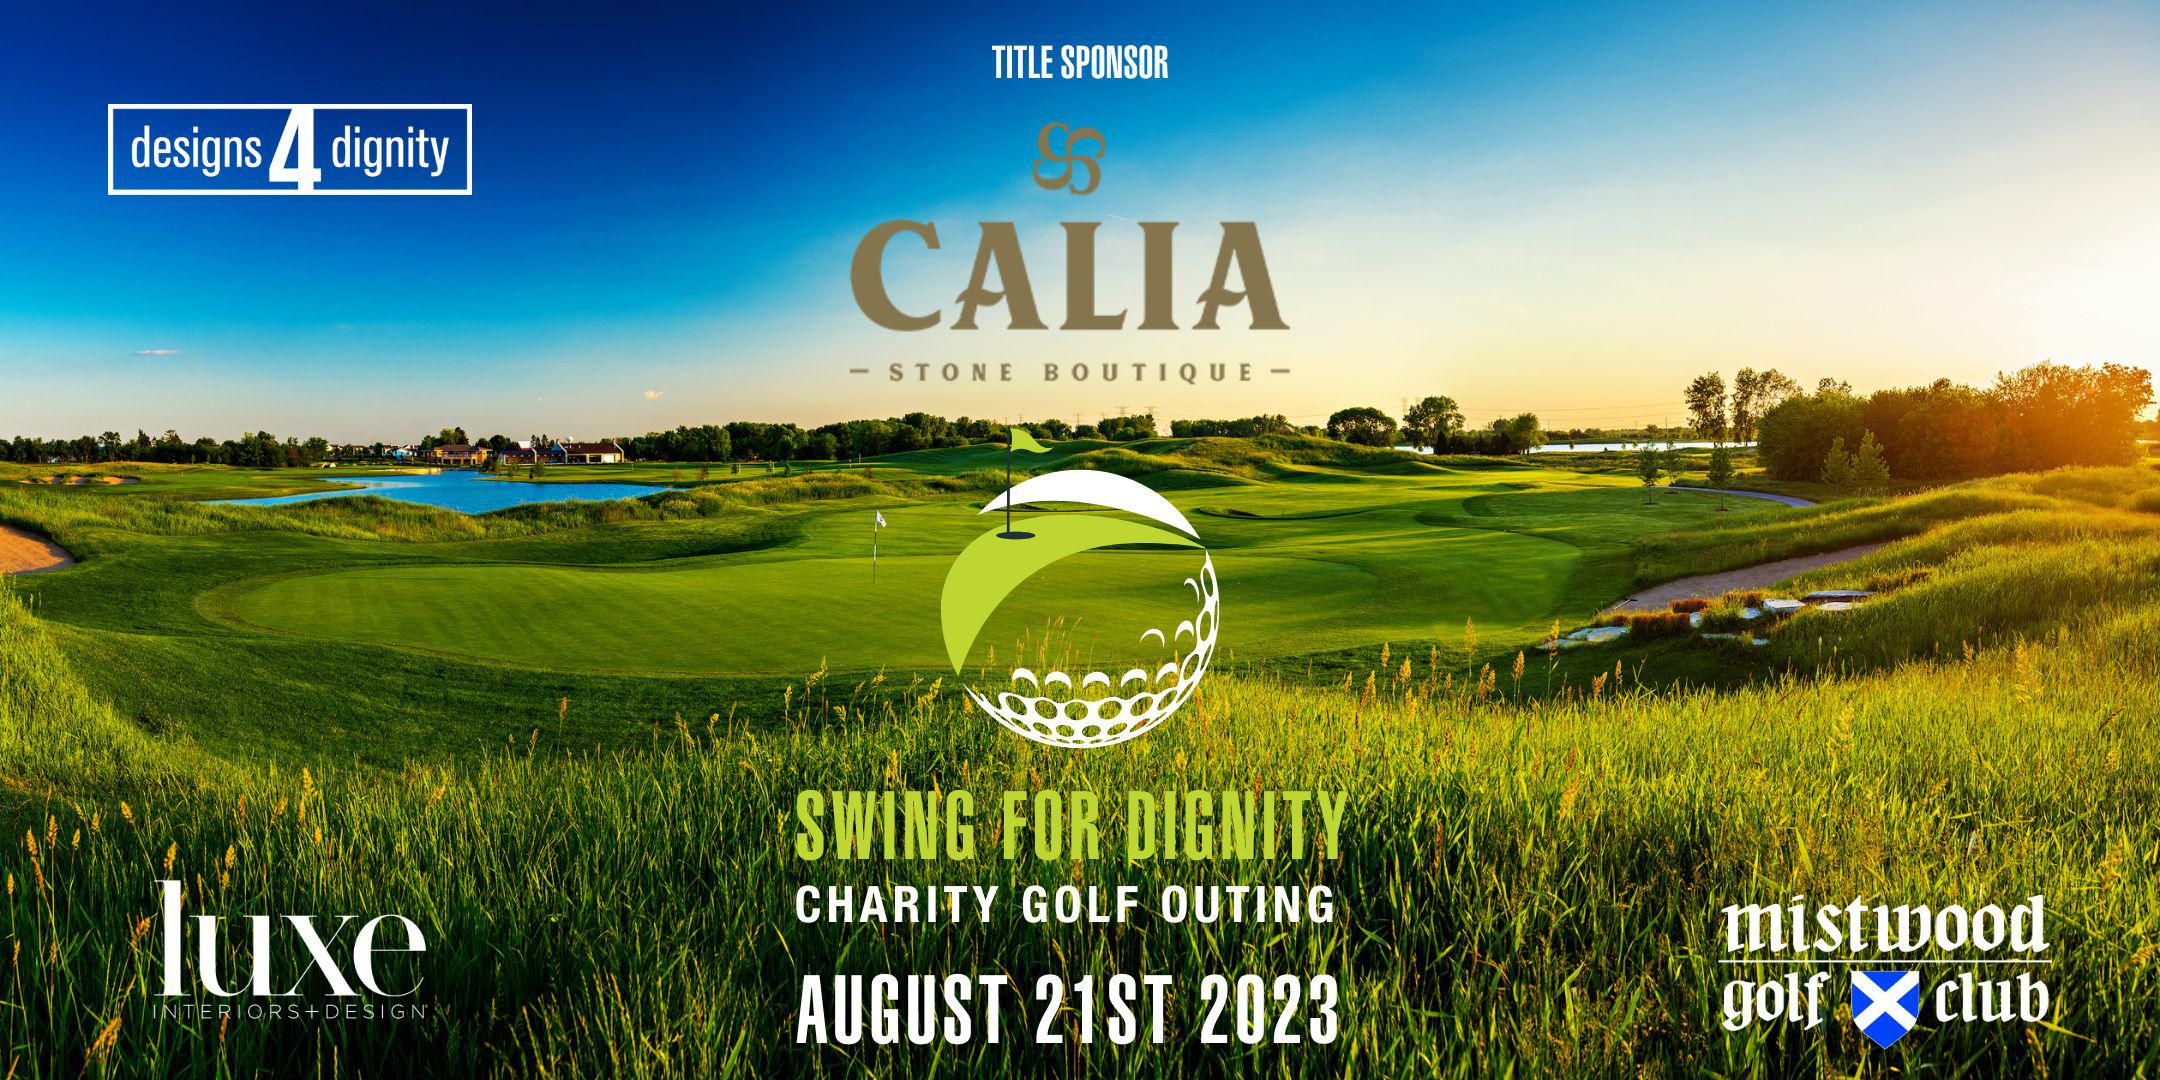 Swing for Dignity - Charity Golf Outing